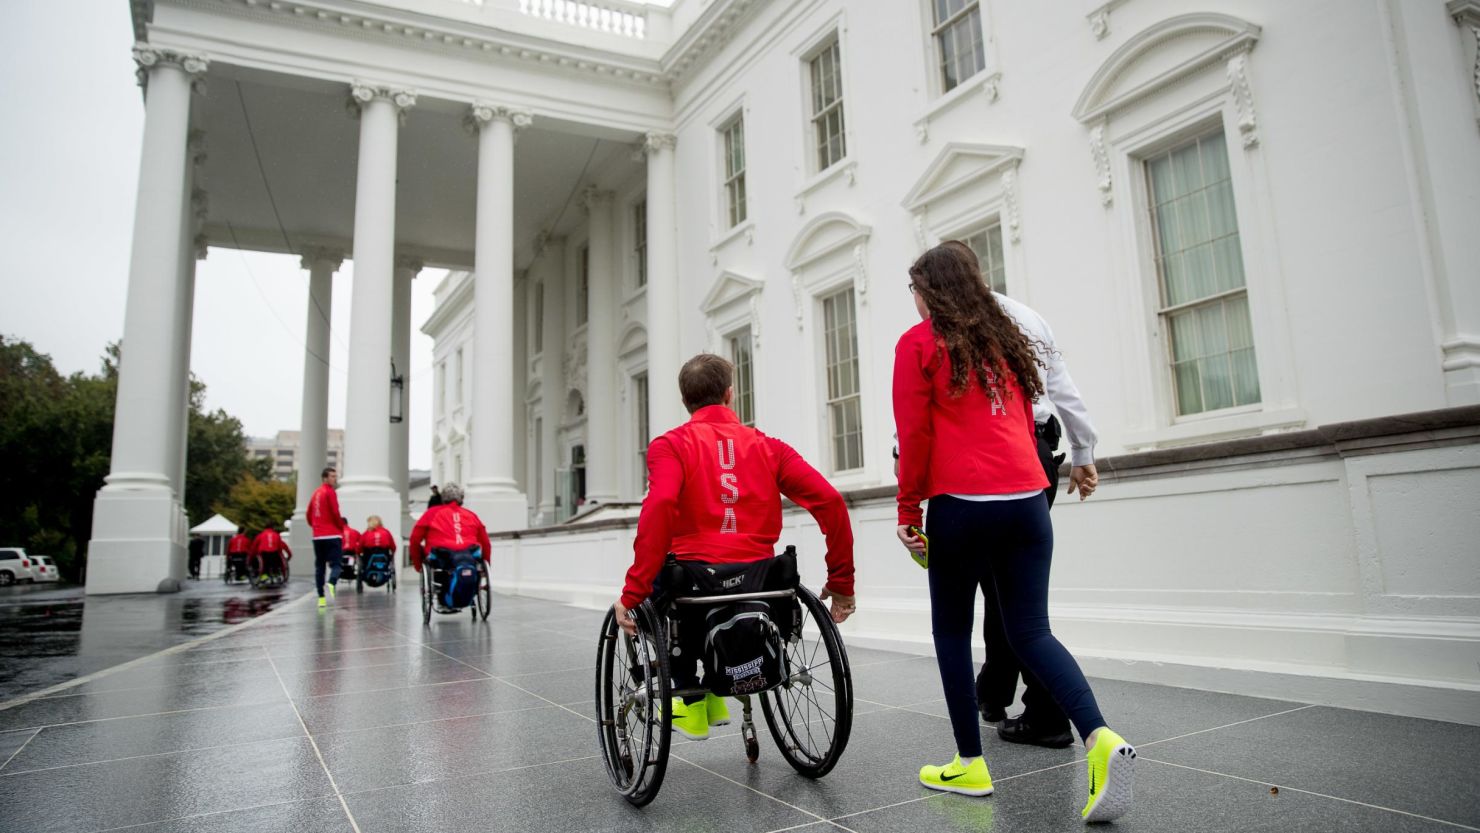 US Paralympian Kory Puderbaugh was invited to the White House by President Barack Obama in September 2016, for an event to celebrate the achievements of US Paralympians and Olympics at the Games in Rio. Puderbaugh says he had to be pulled through a kitchen lift because they didn't have an elevator for wheelchair access. 